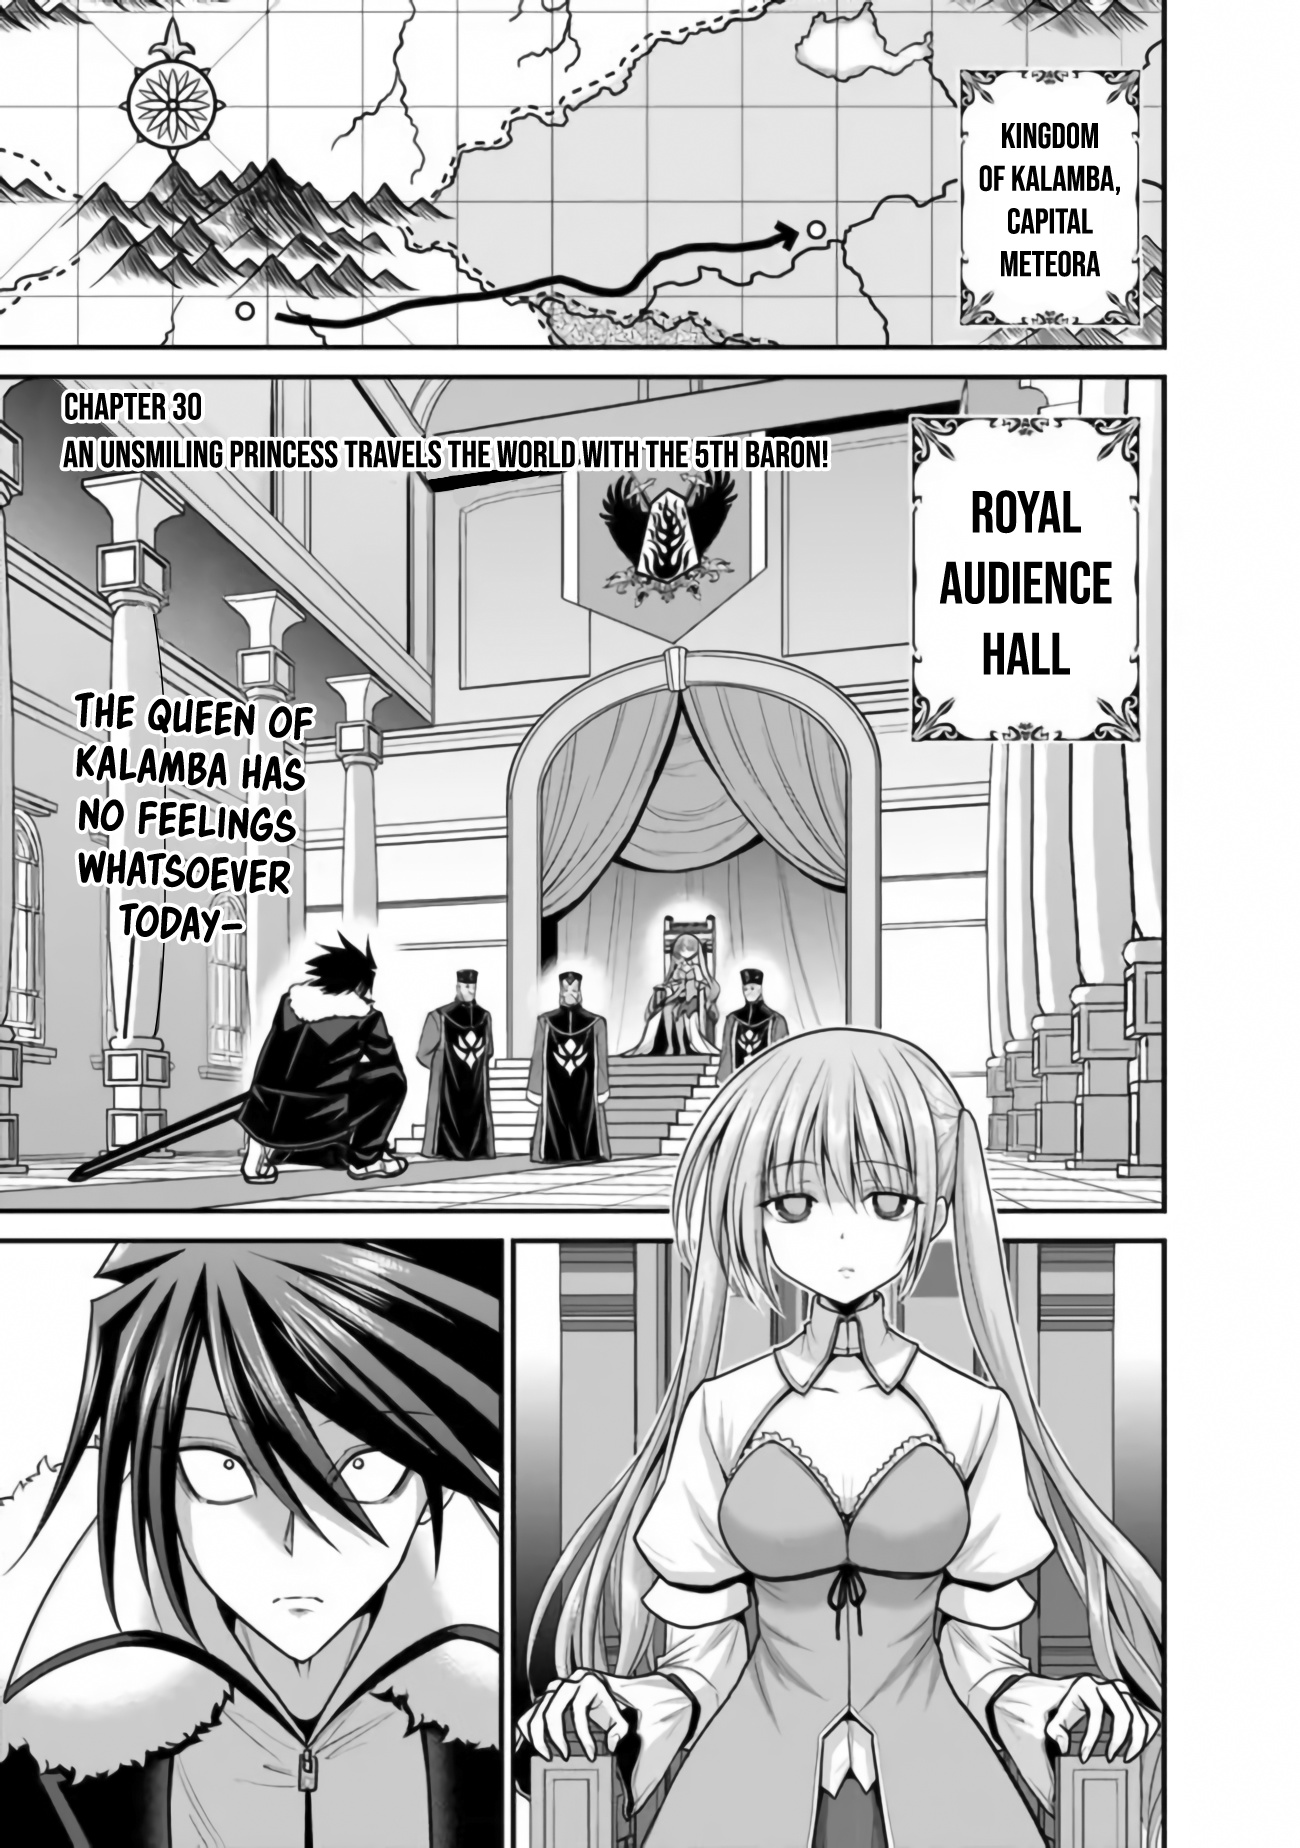 Kujibiki Tokushou Musou Harem-Ken Vol.7 Chapter 30: An Unsmiling Princess Travels The World With The 5Th Baron! - Picture 2